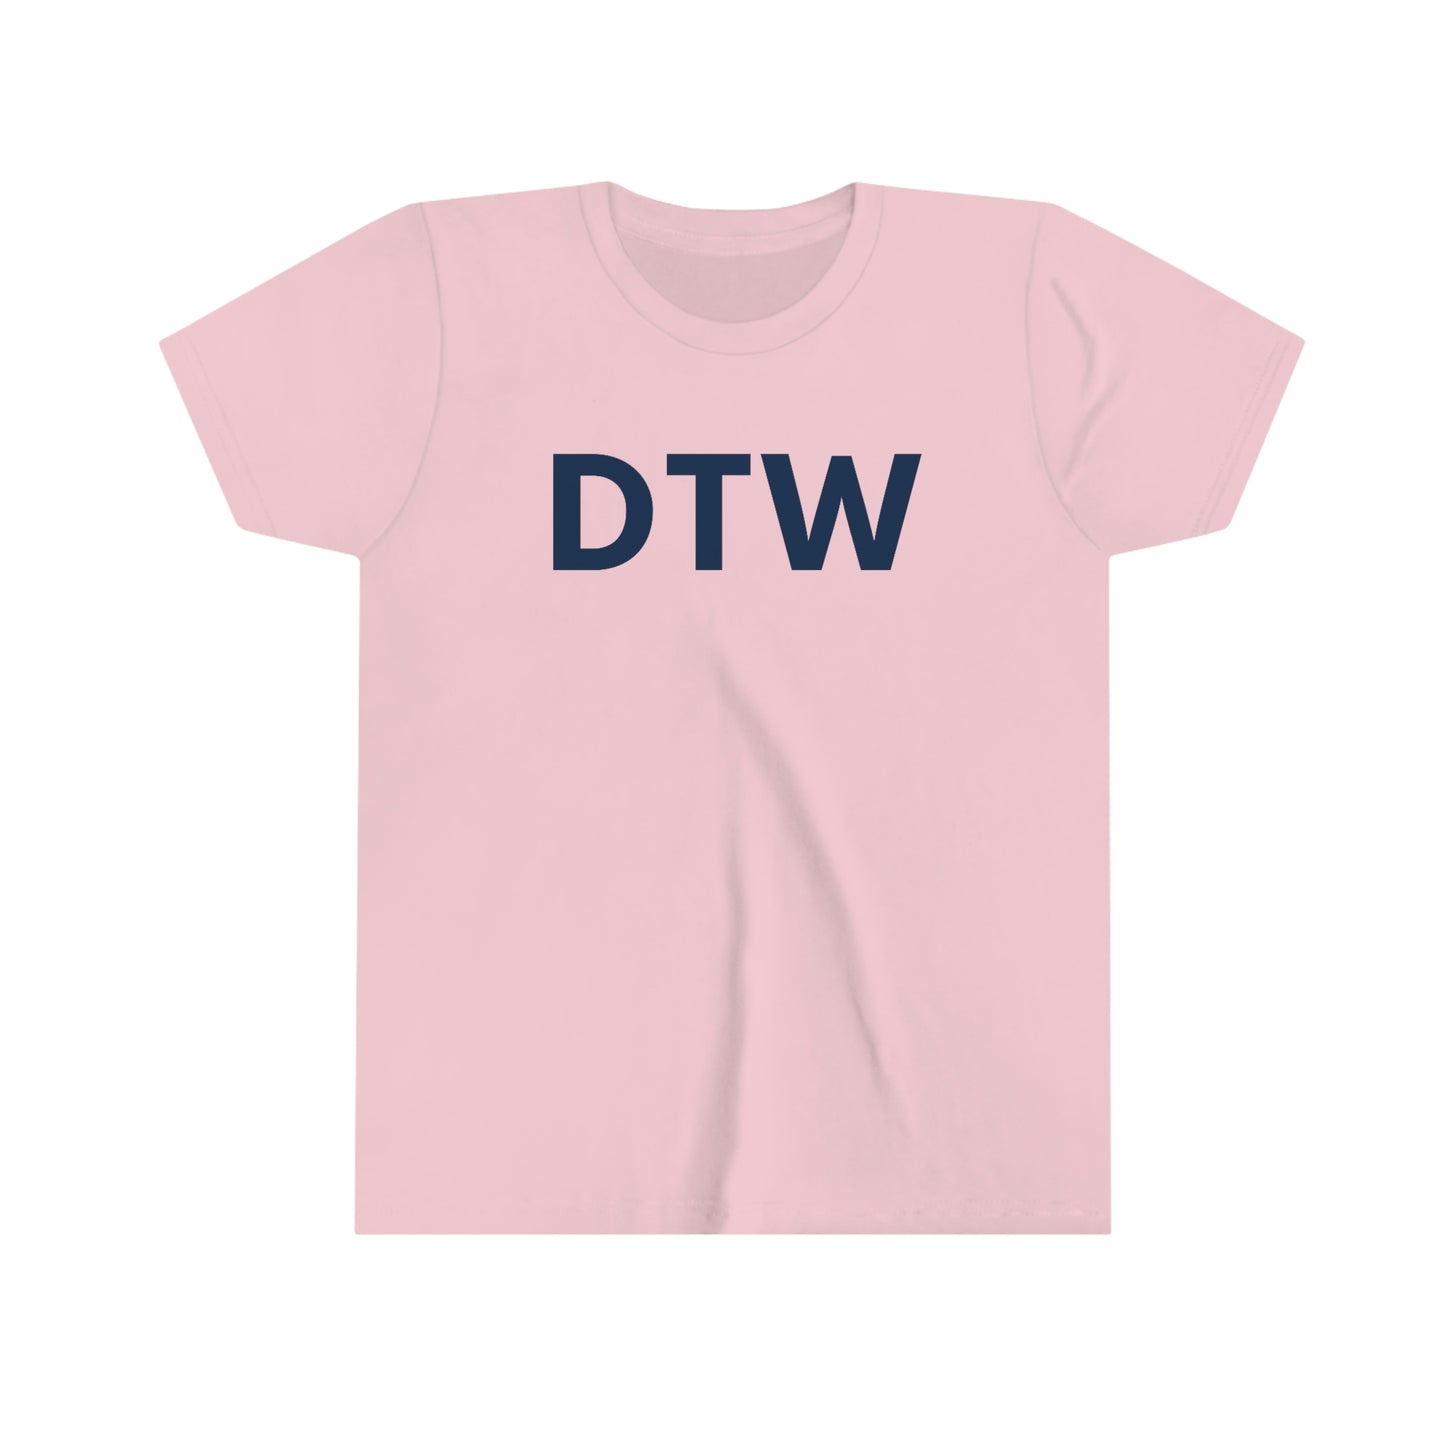 Detroit 'DTW' T-Shirt | Youth Short Sleeve